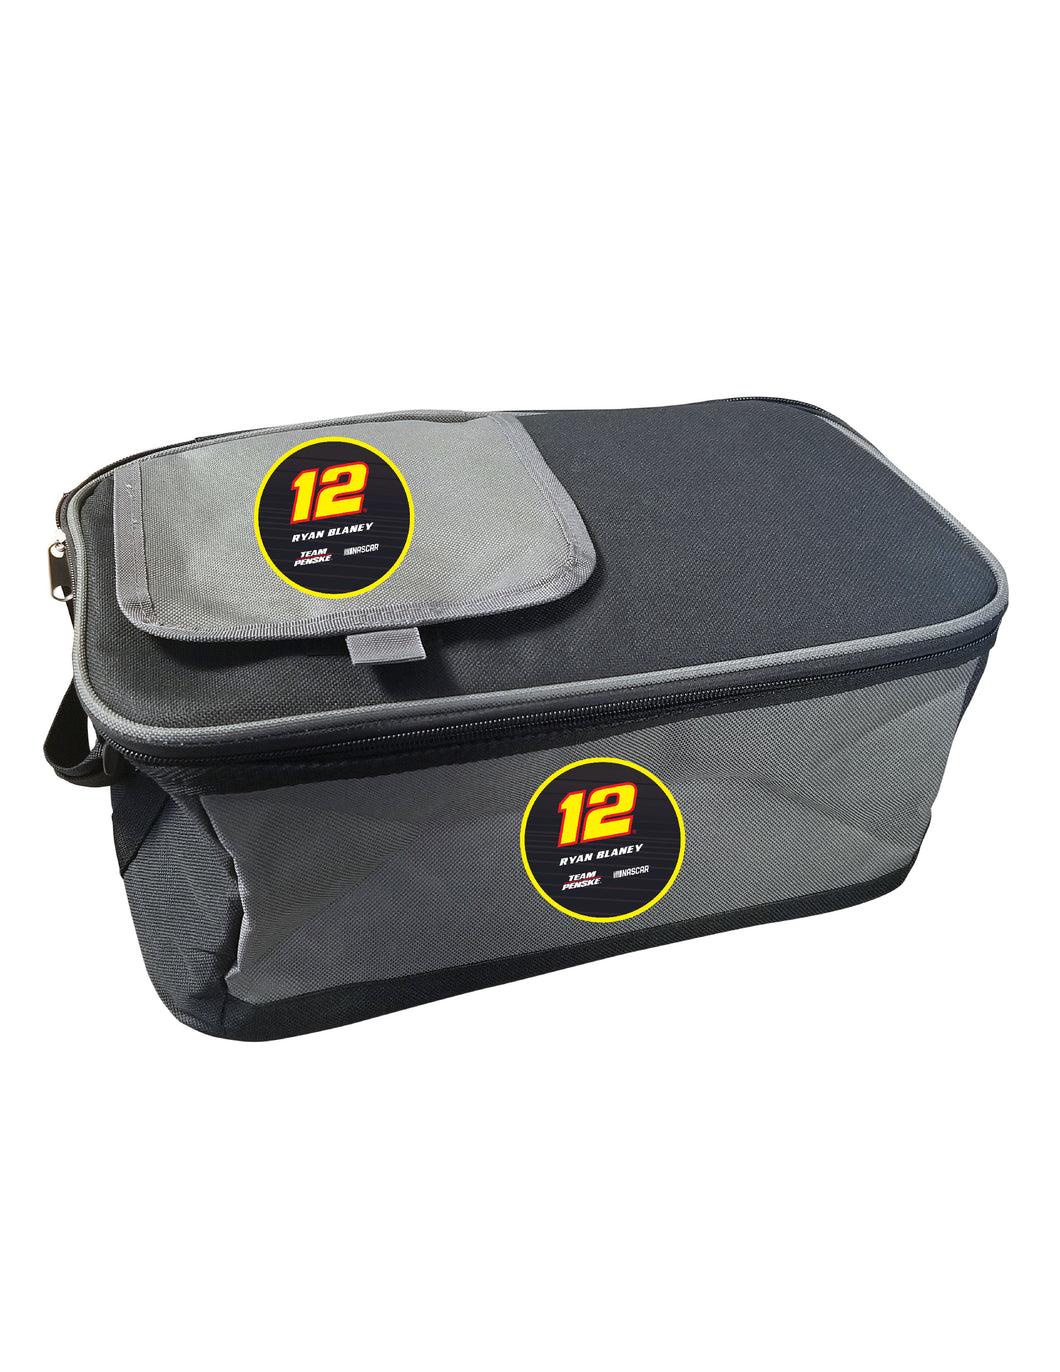 R and R Imports Officially Licensed NASCAR 9 Pack Cooler New for 2020